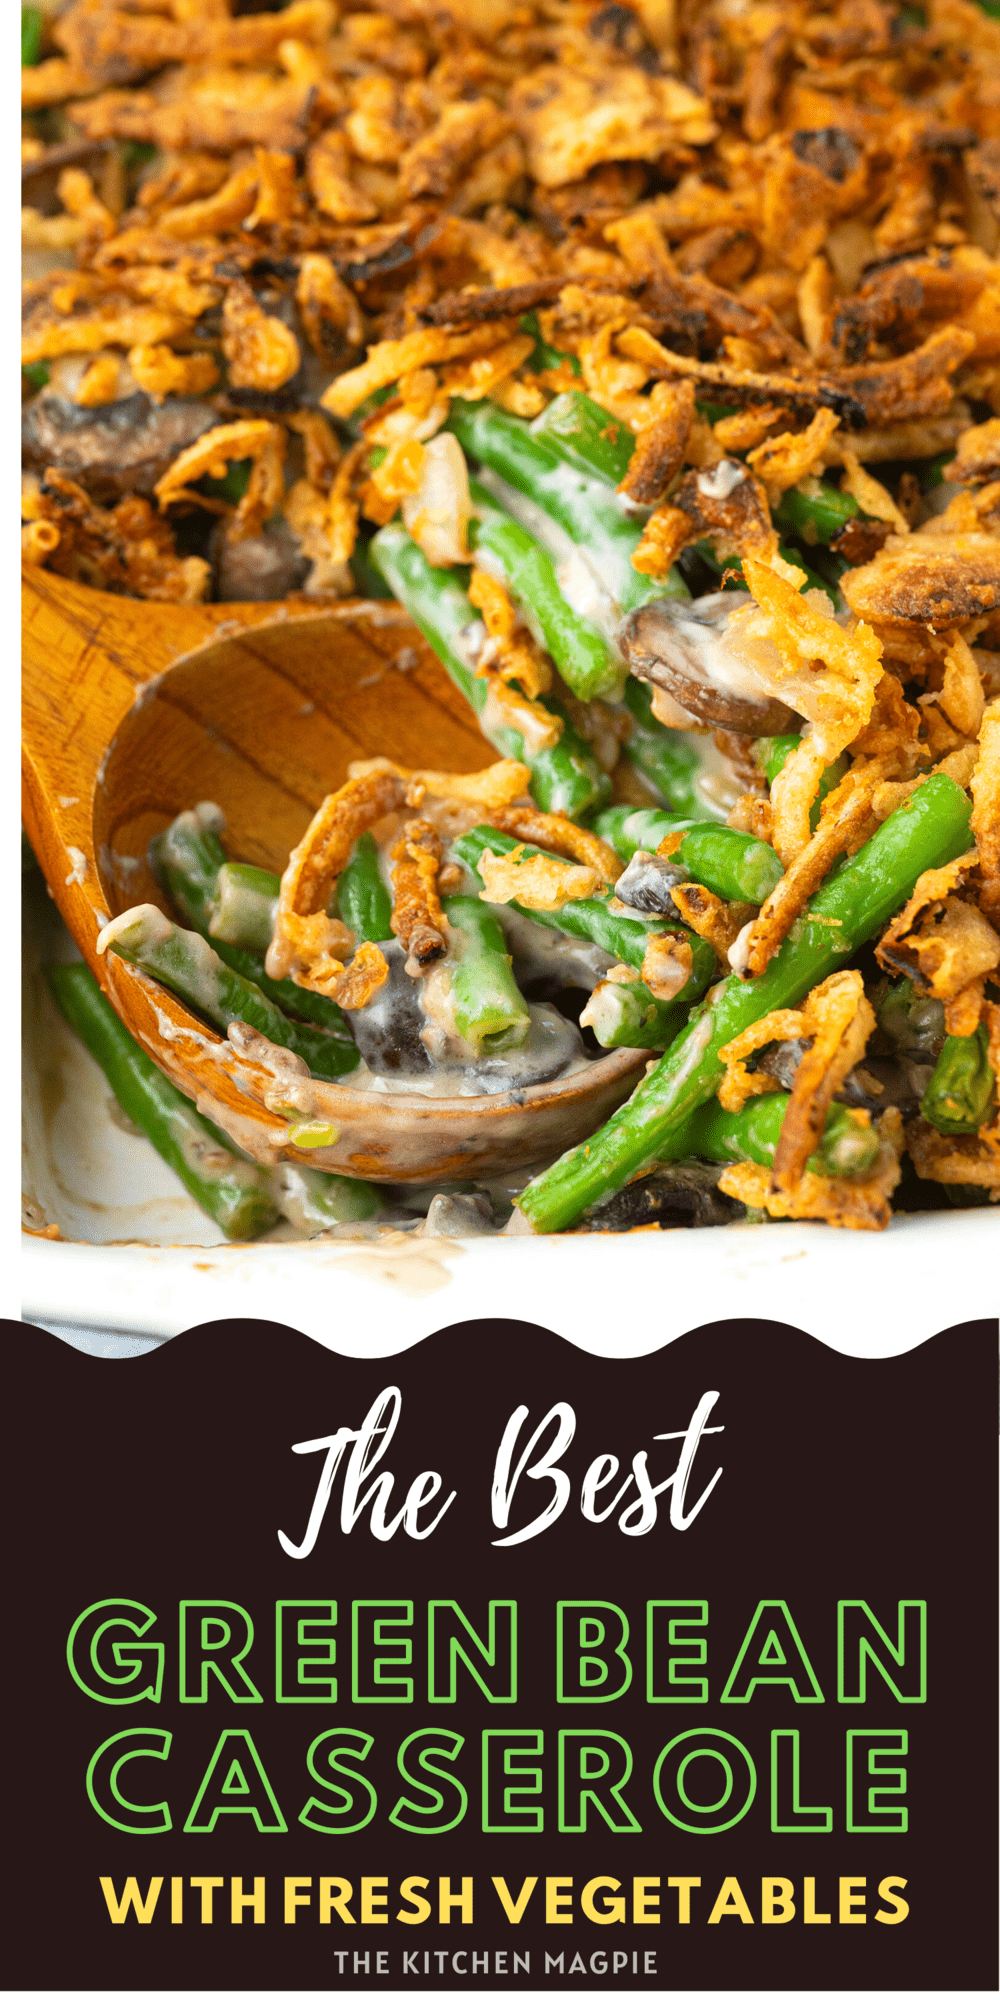 This green bean casserole uses fresh green beans, mushrooms and onions, but still has that classic taste with cream of mushroom soup and crispy onion topping!